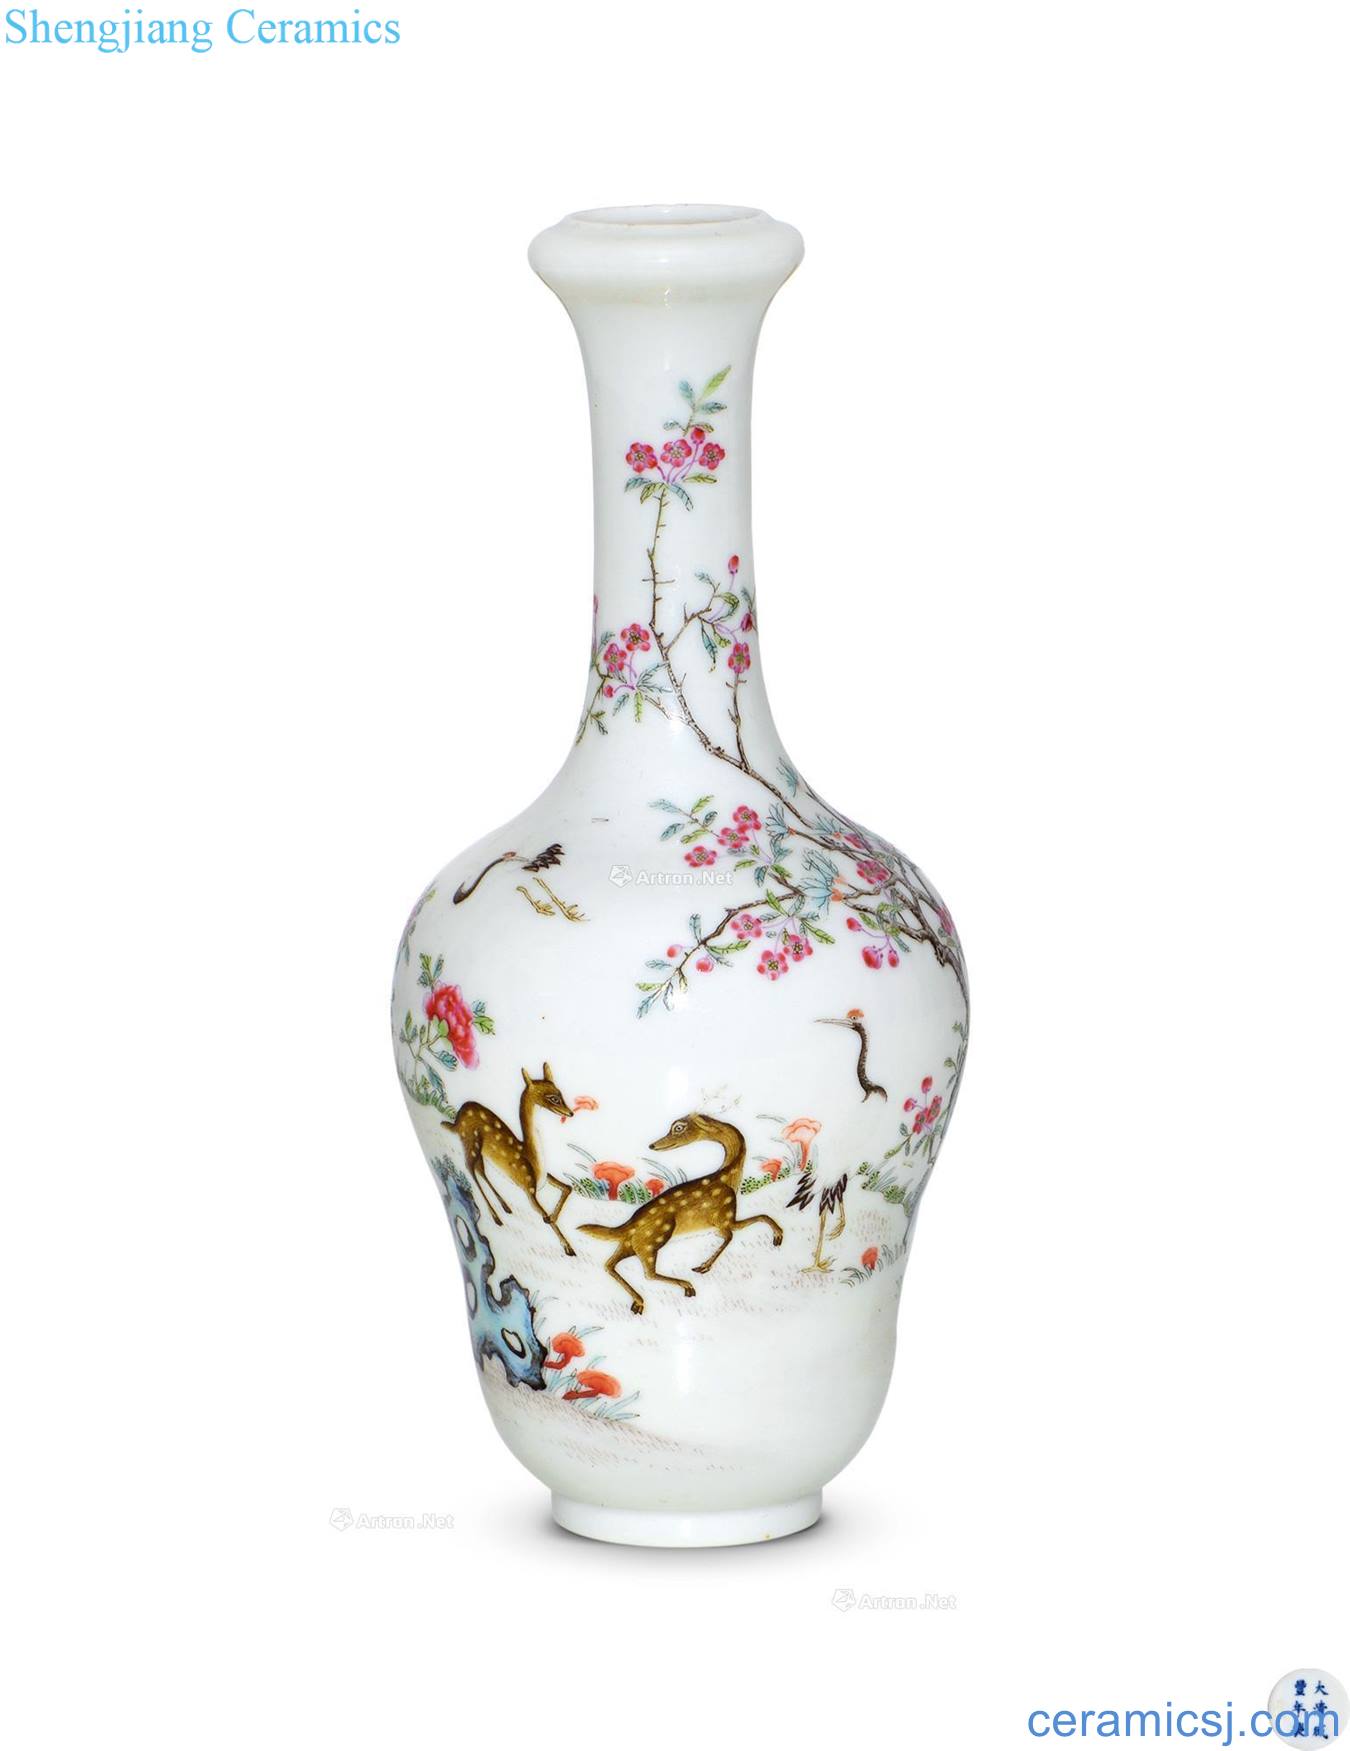 Qing xianfeng pastel LuHe with spring waist small bottle